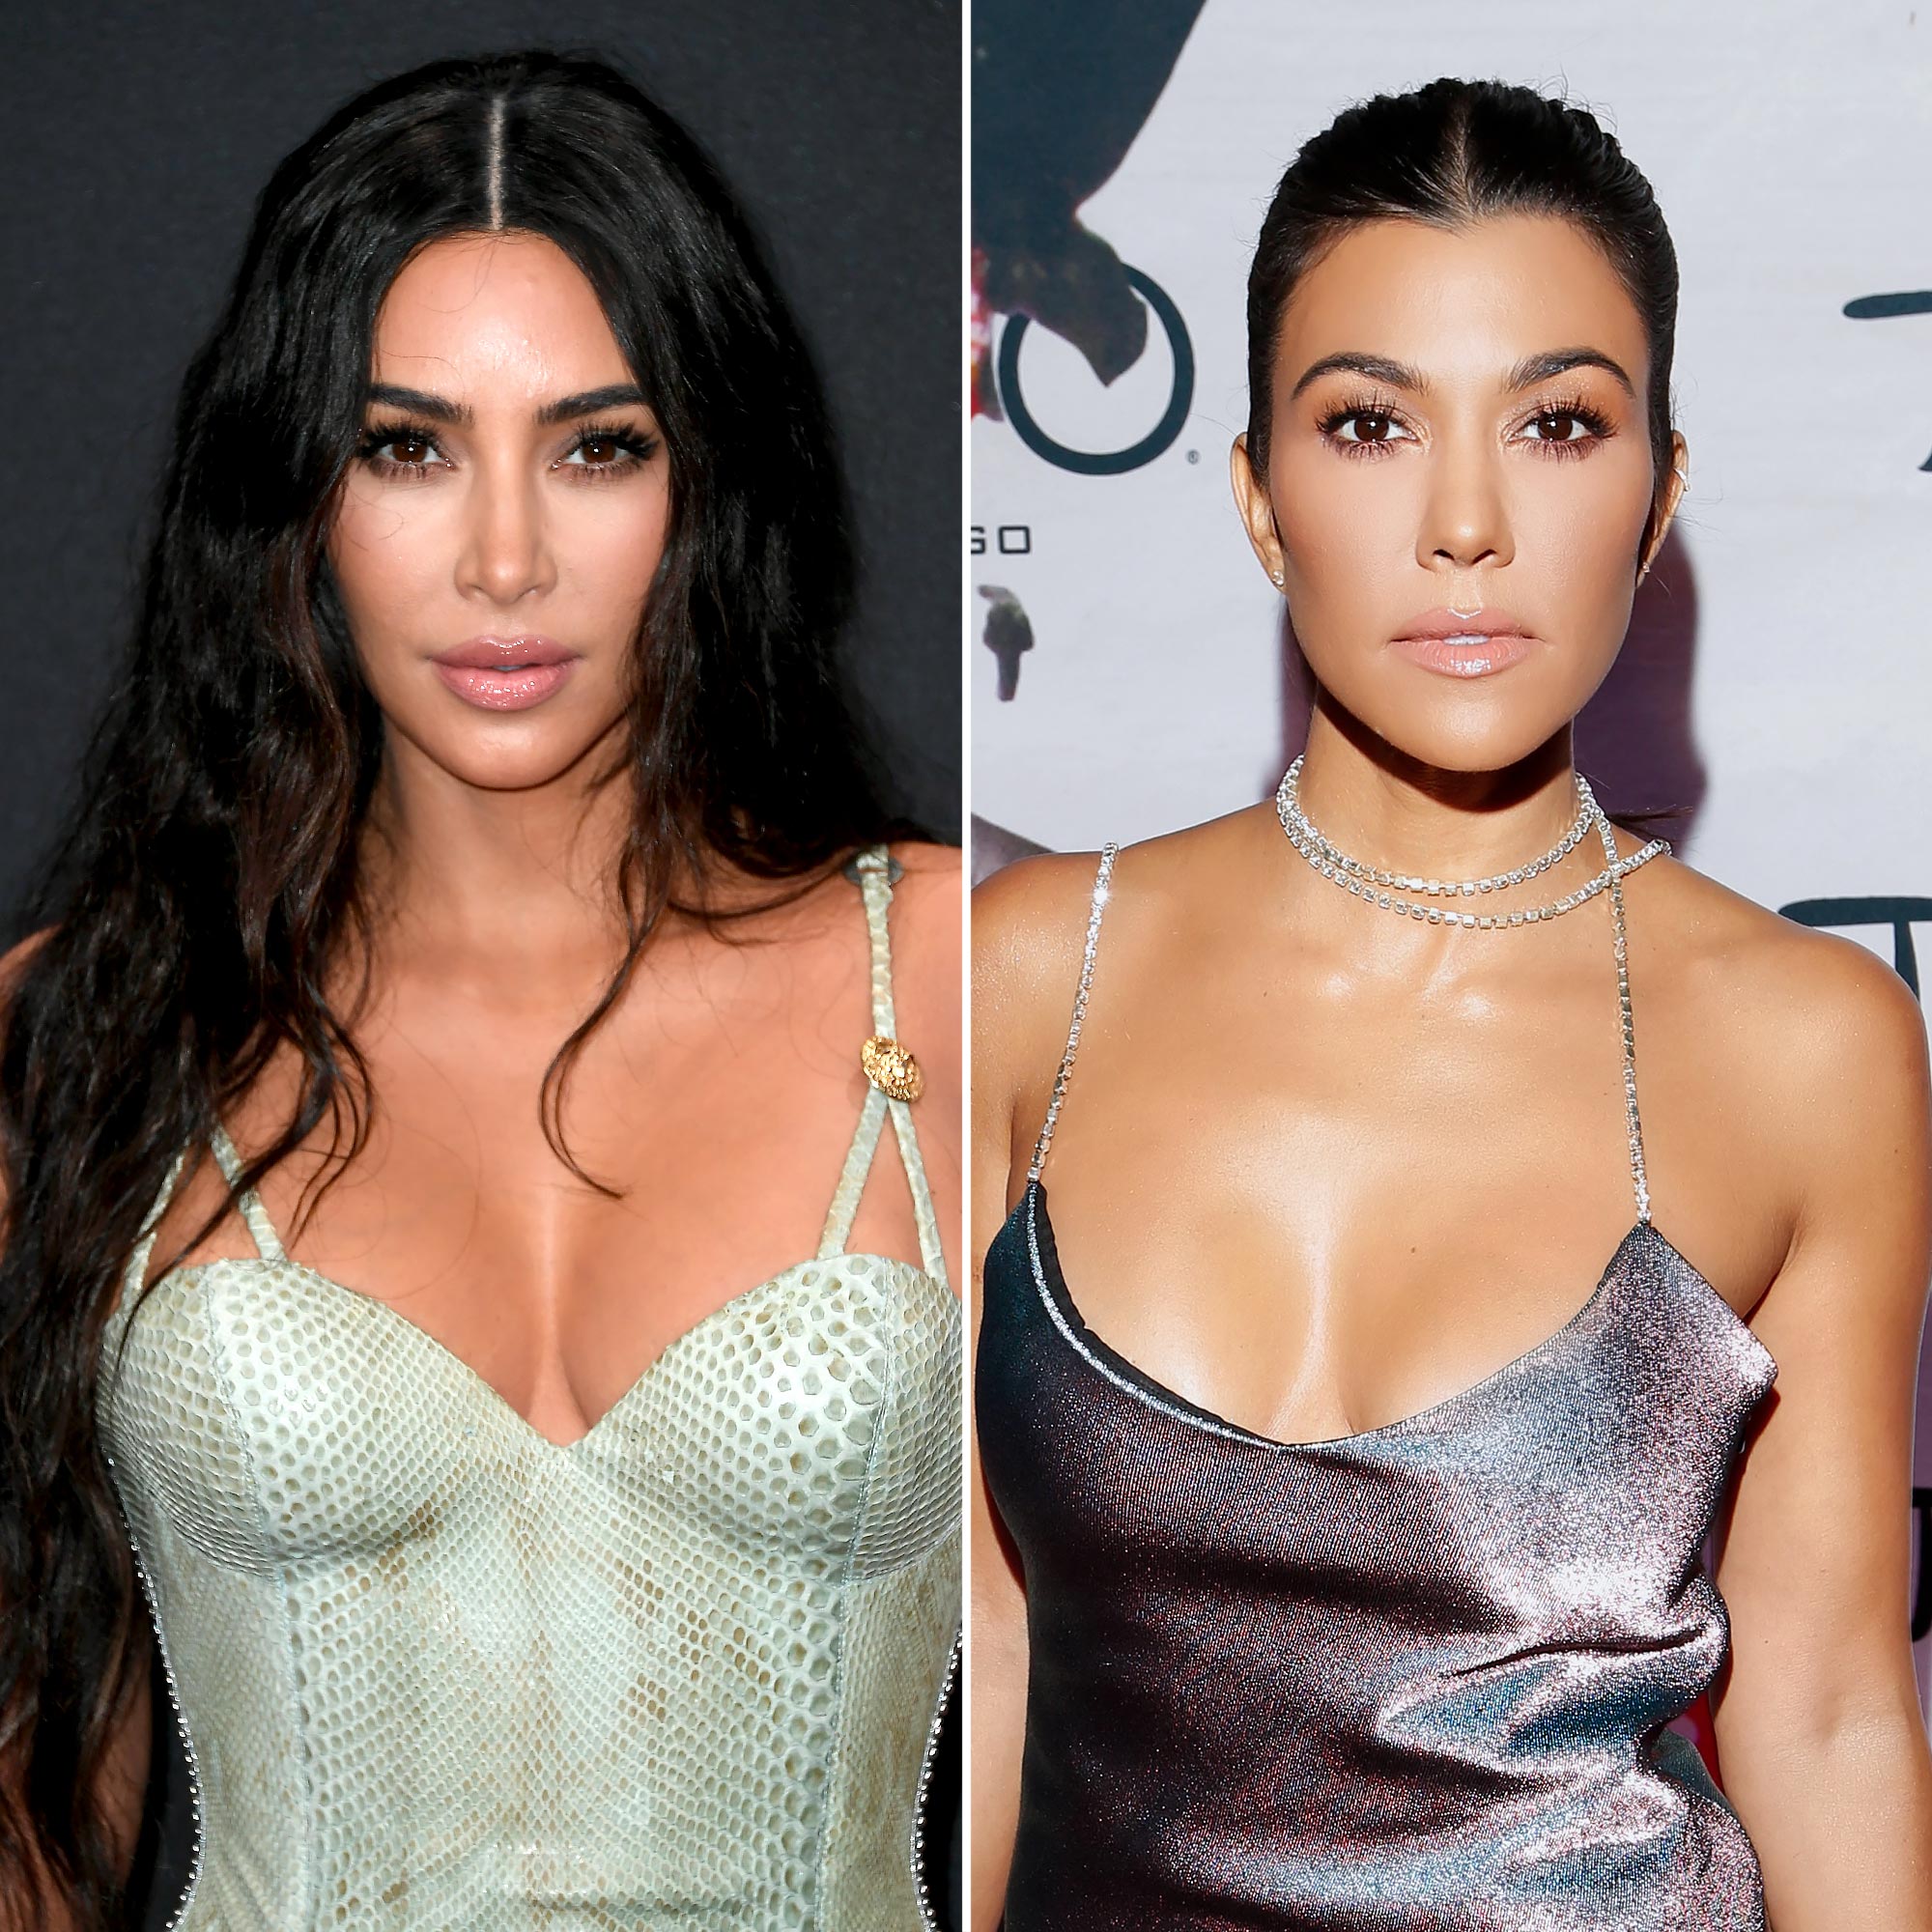 Breaking Down Every 'Hurtful' Dig From Kim and Kourtney Kardashian's 'Heated' Call Which Reignited Their Feud